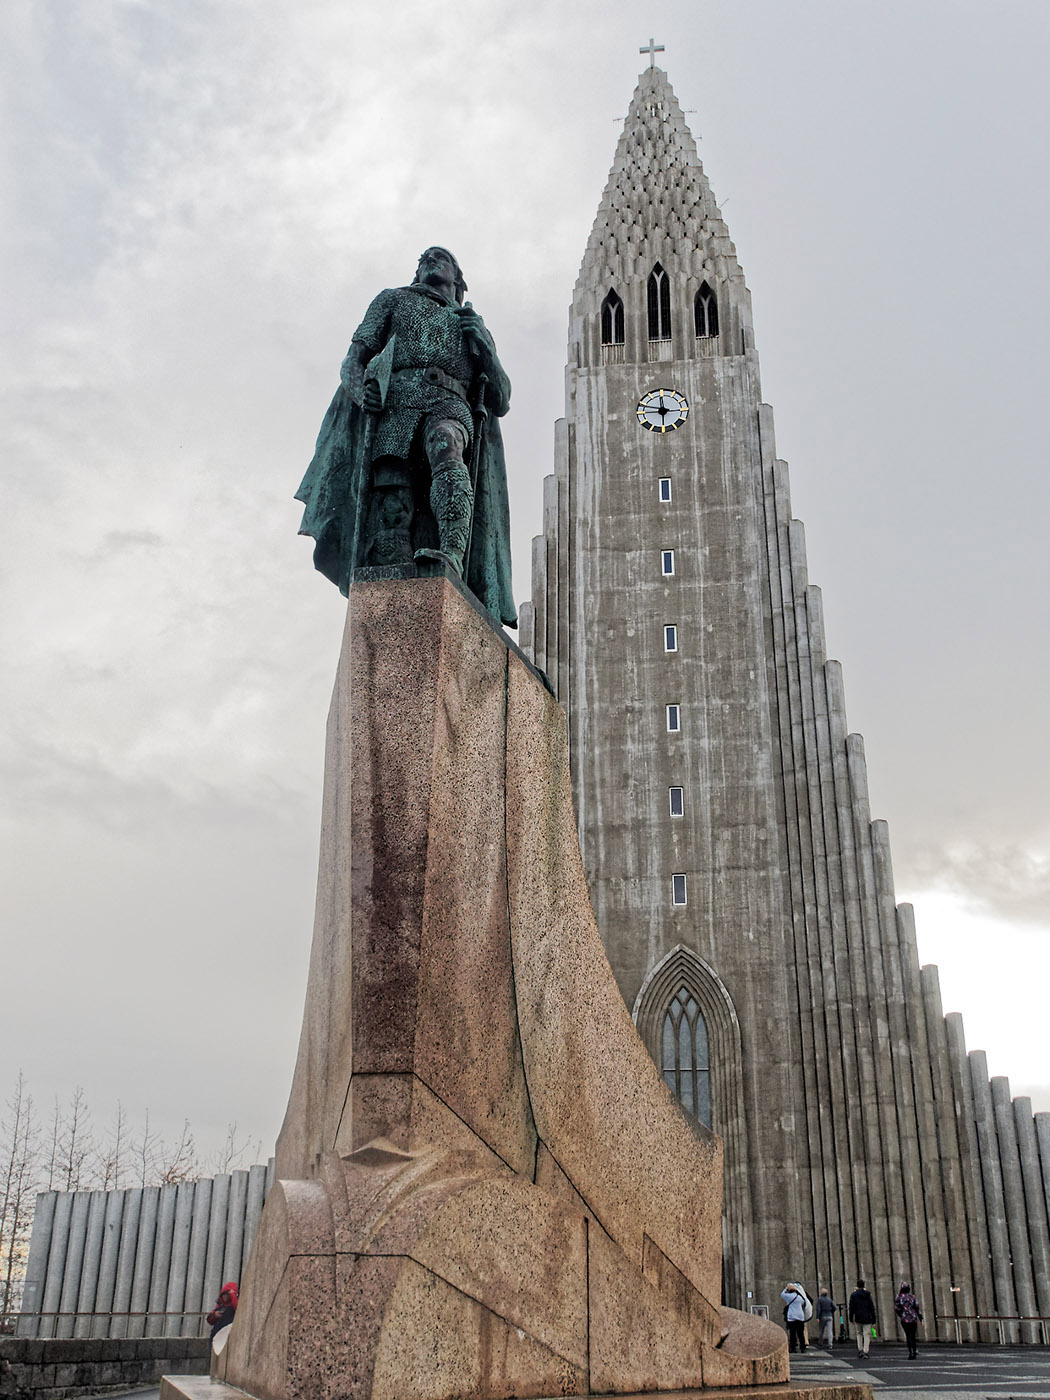 The statue of Leifur Eiríksson (c. 970 - c. 1020) who was the first European to land on North America (c. 1000 CE) is in front of Hallgrímskirkja on the most prominent hilltop, Skólavörðuholt, in Reykjavik. The early settlers and explorers born in Iceland worshipped Norse gods.  This statue was a gift from the USA to Iceland in 1930, and there was controversy at the time of the gift to place it in such a prominent location at the end of Skólavörðustígur.   The city that helped bring peace between Reagan and Gorbachev offers peaceful coexistence between Pagans and Christians.